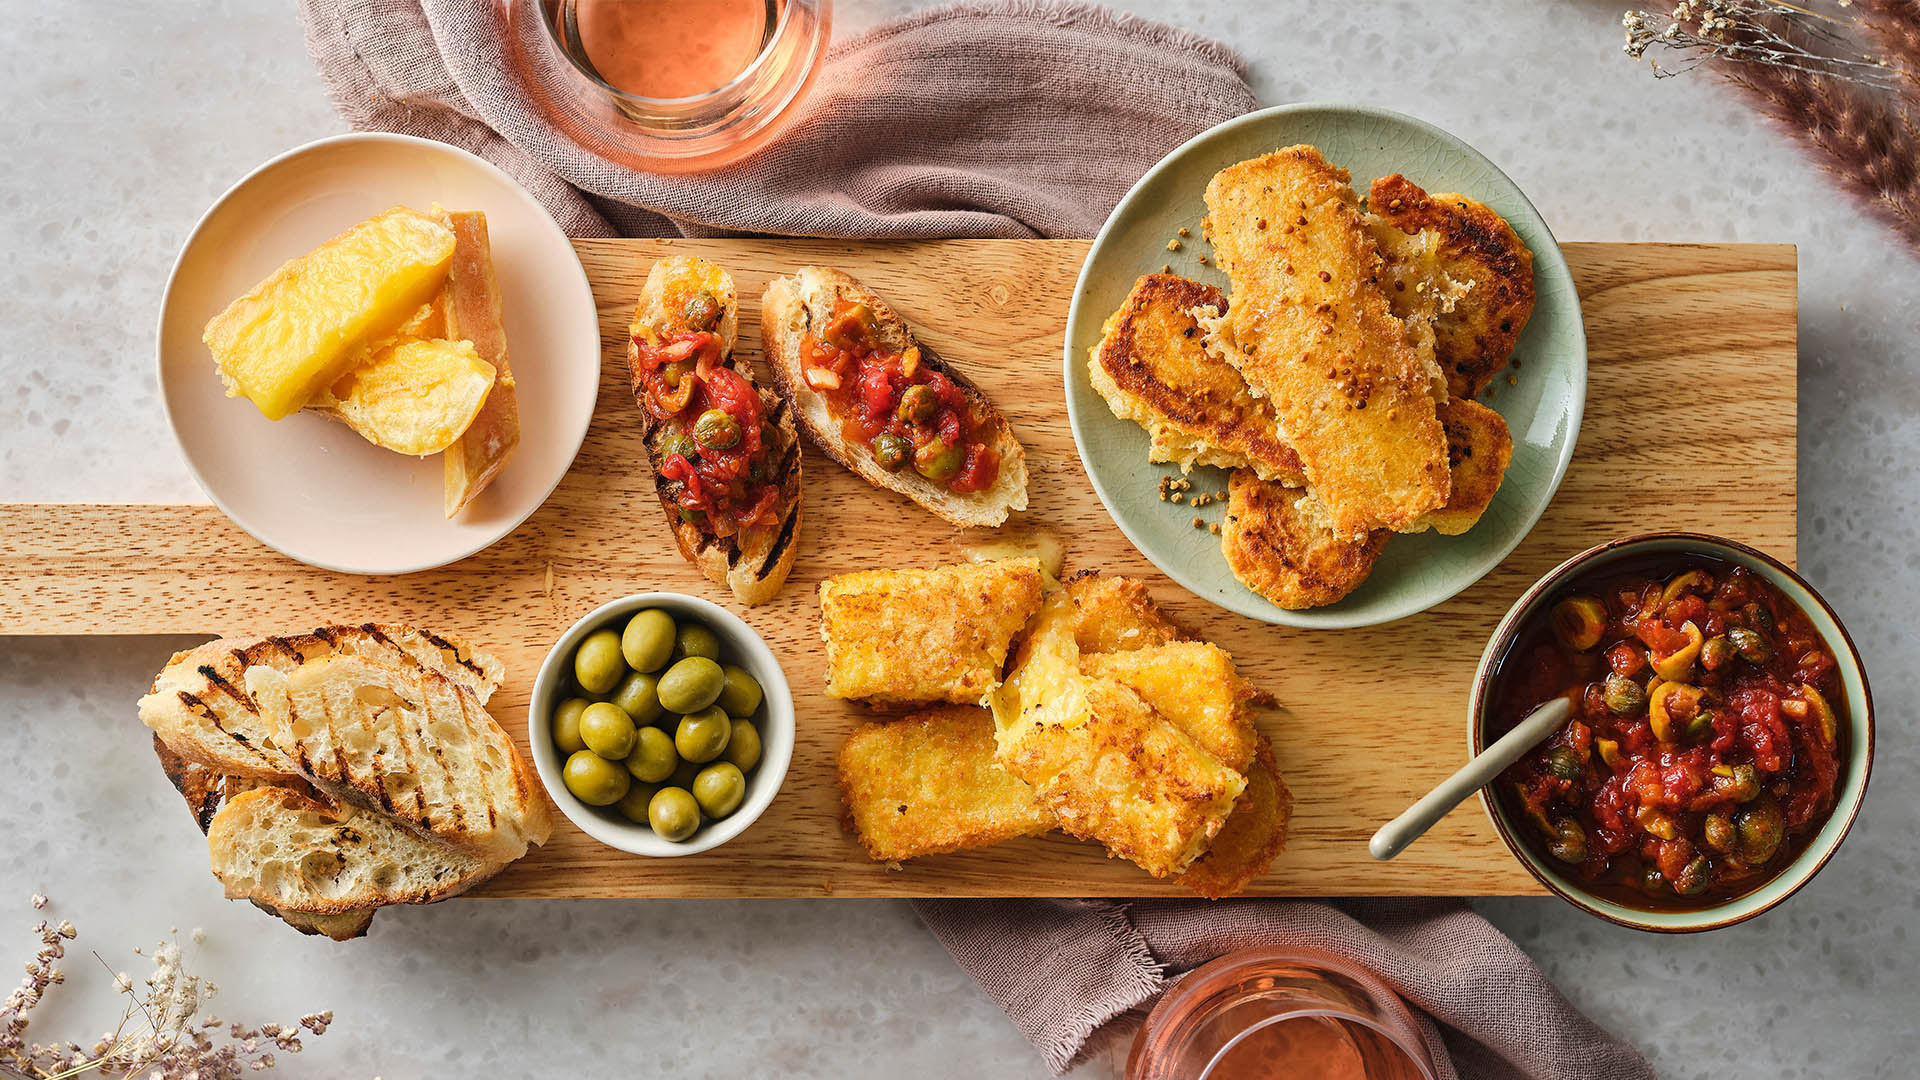 Overhead shot of a wooden serving board with pan fried cheeses, bread, bowl of olives, tapenade.